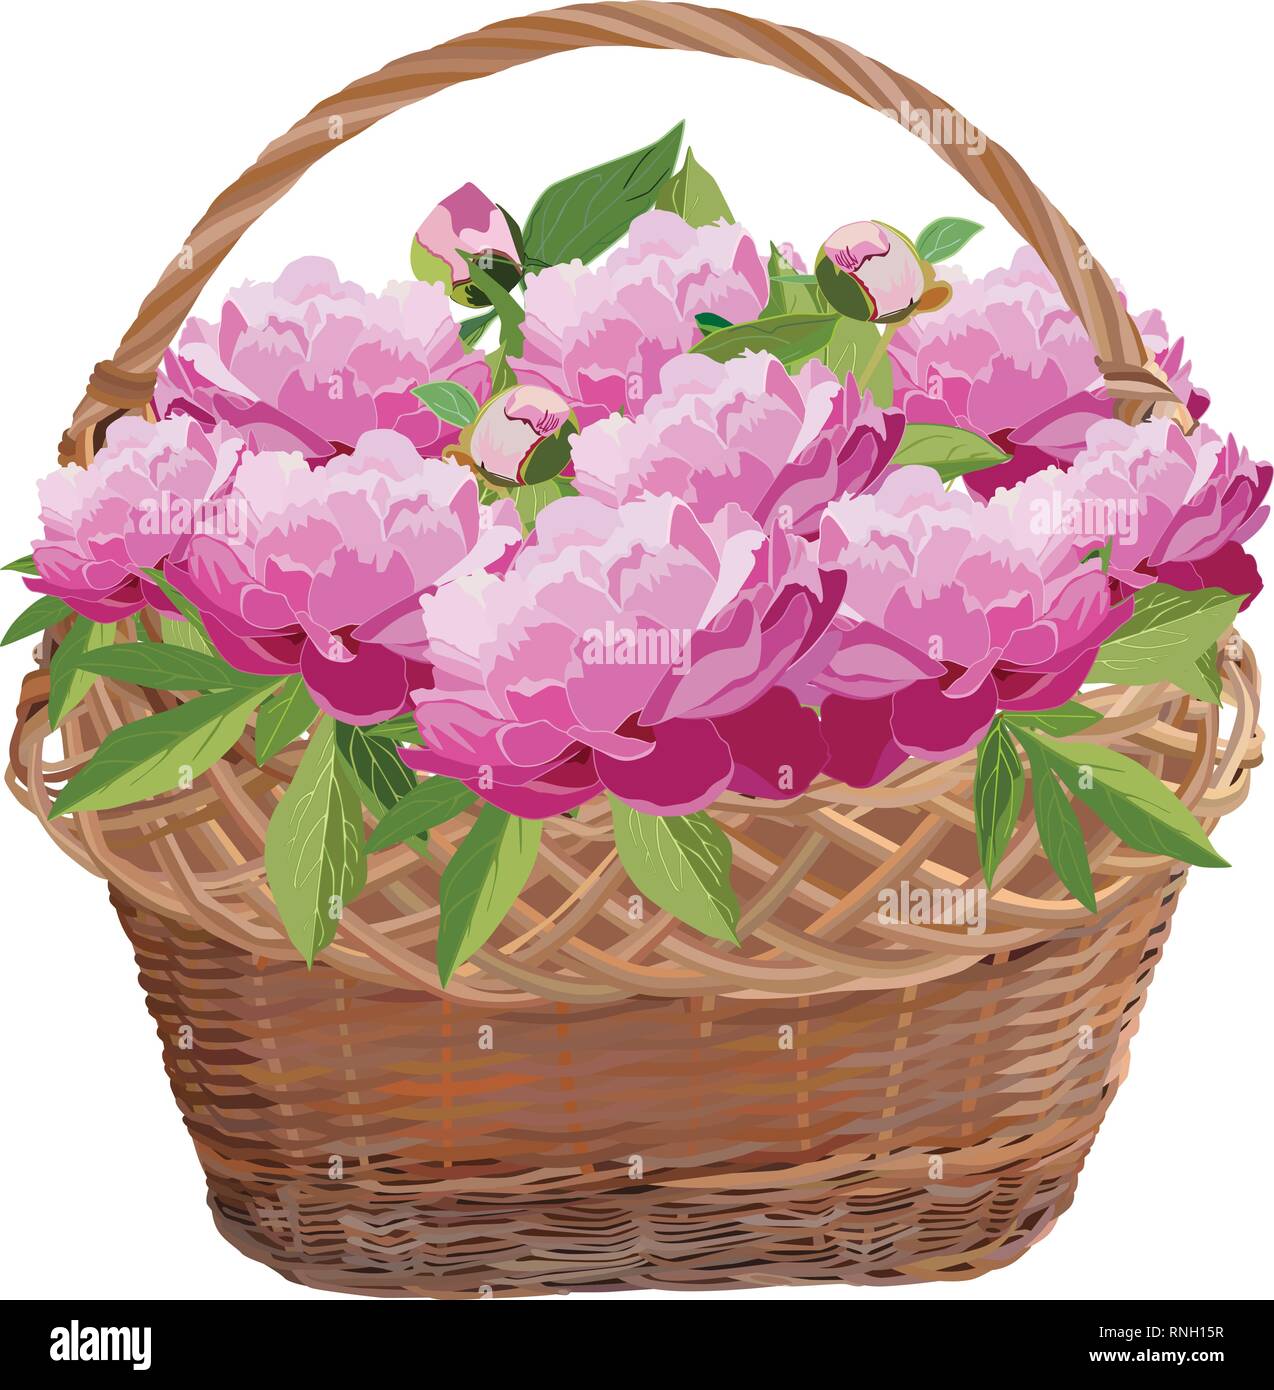 Wicker basket with pink peony flowers. Vector flat illustration isolated on white background. Stock Vector